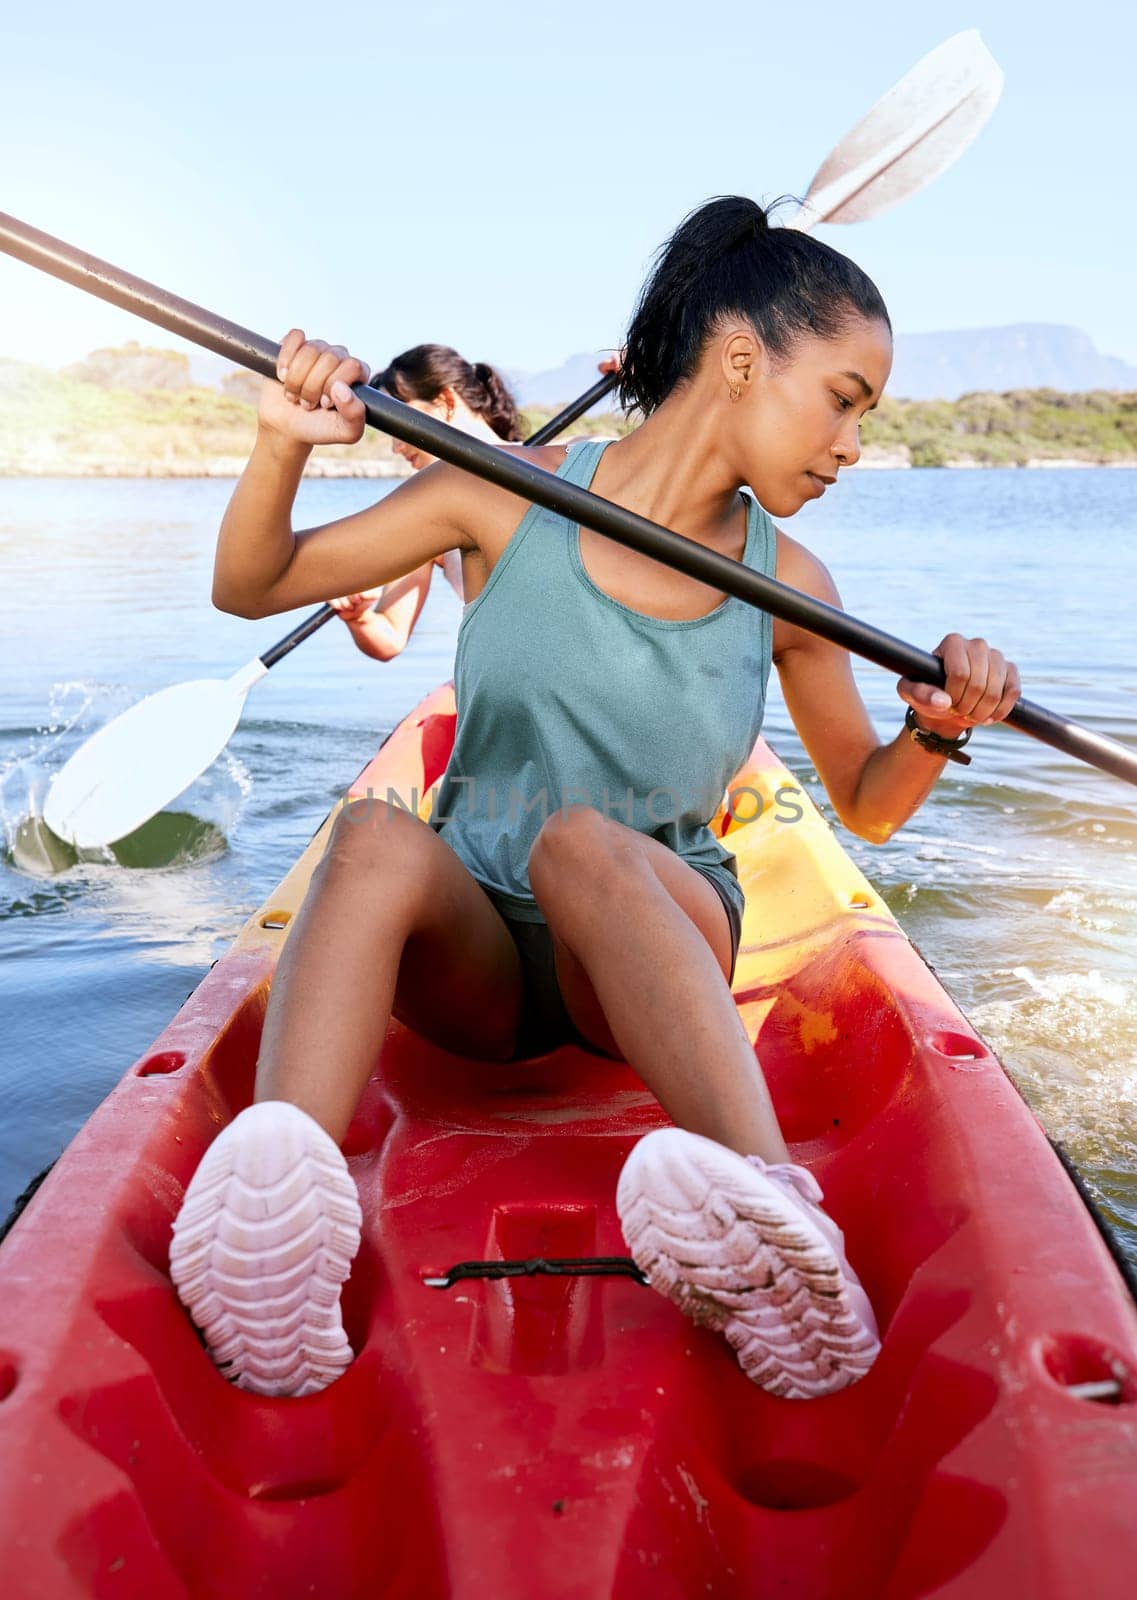 Lake, friends and kayak adventure with water sport on travel trip canoeing, kayaking and using paddle on calm nature river. Exercise, vacation or holiday with women enjoying boat activity in summer.